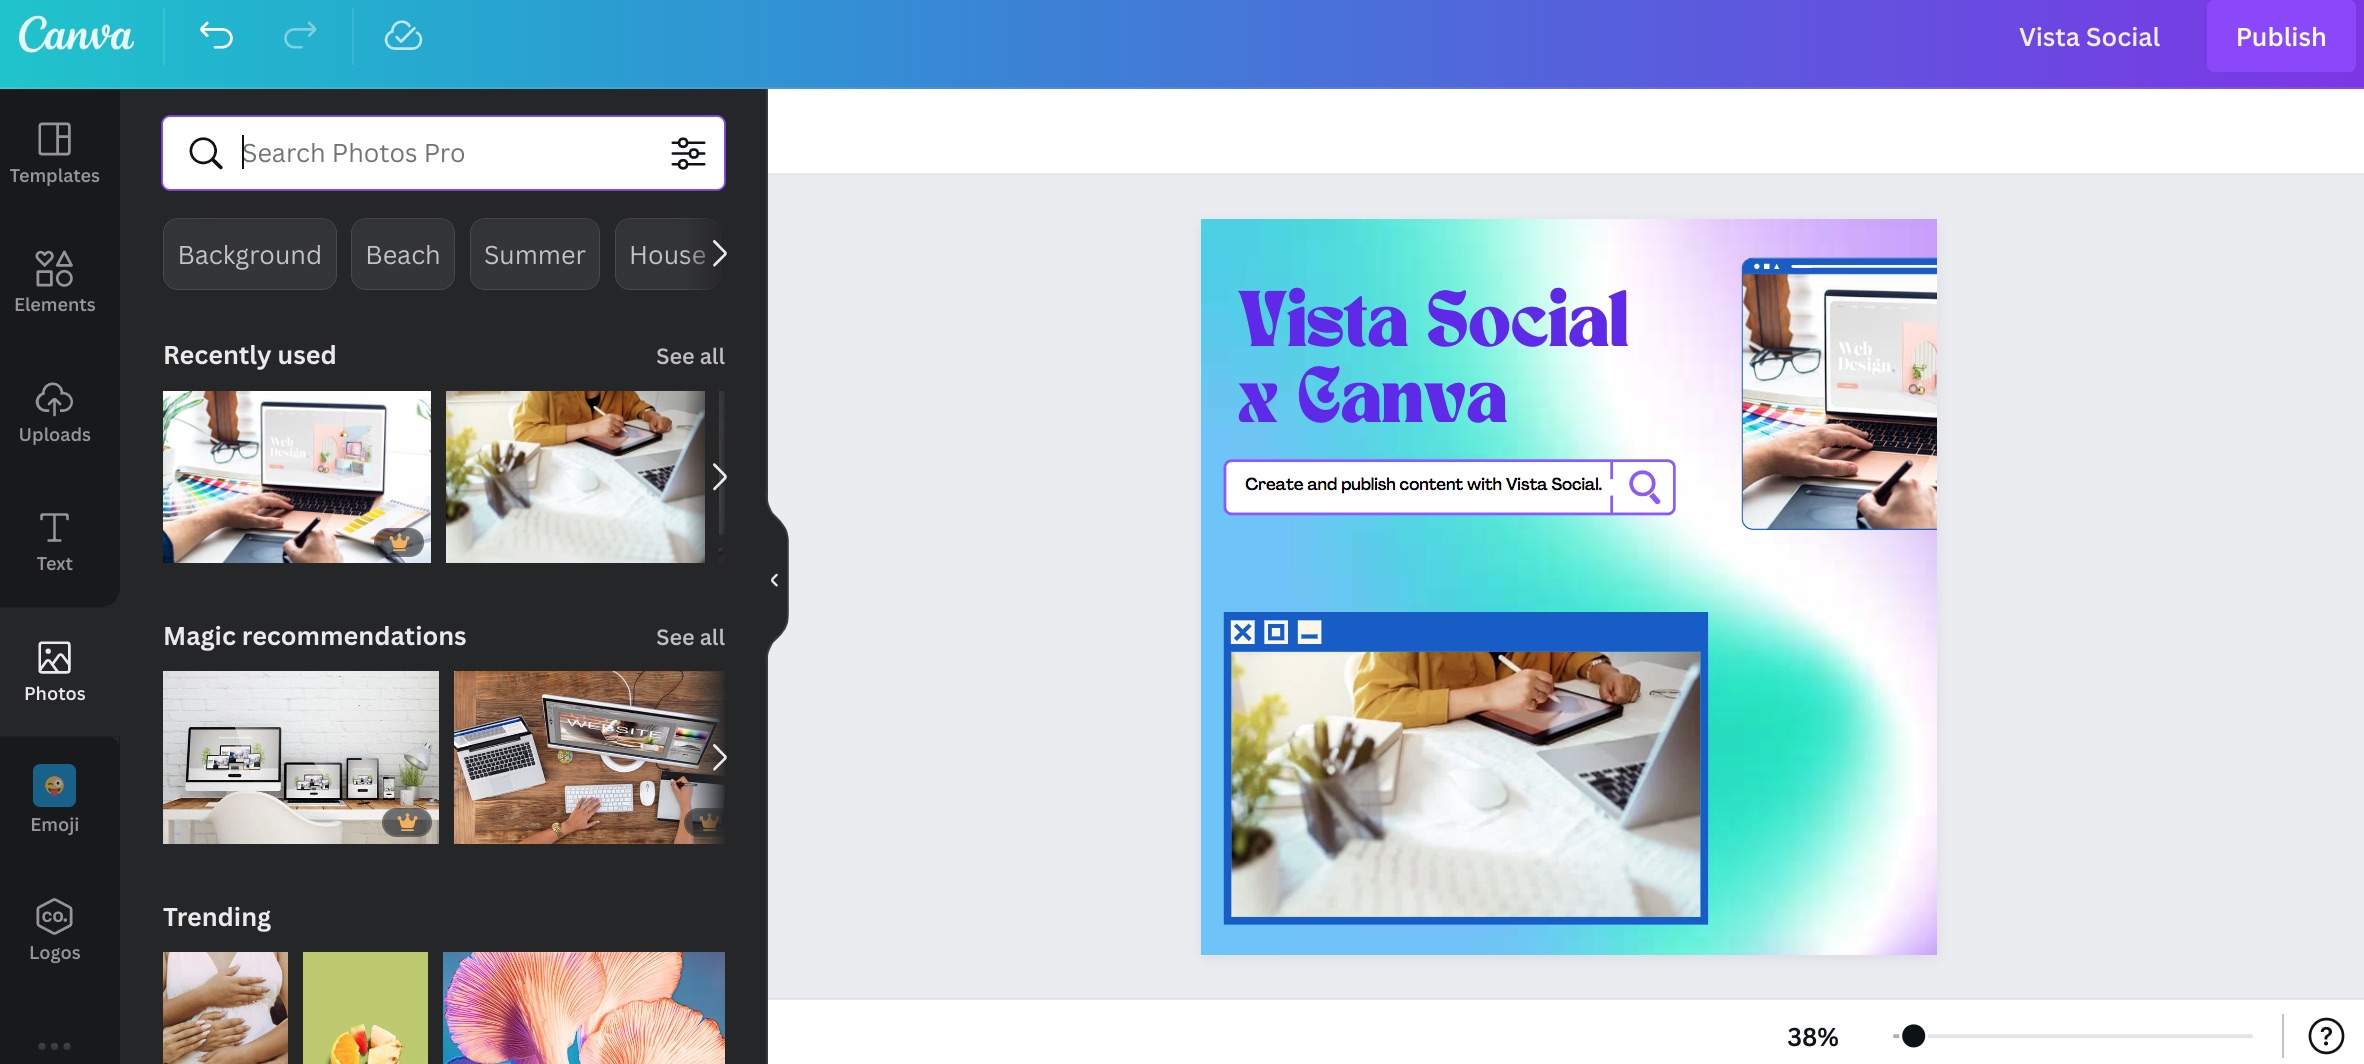 Our Canva Integration: Design and Share Content Instantly in Vista Social